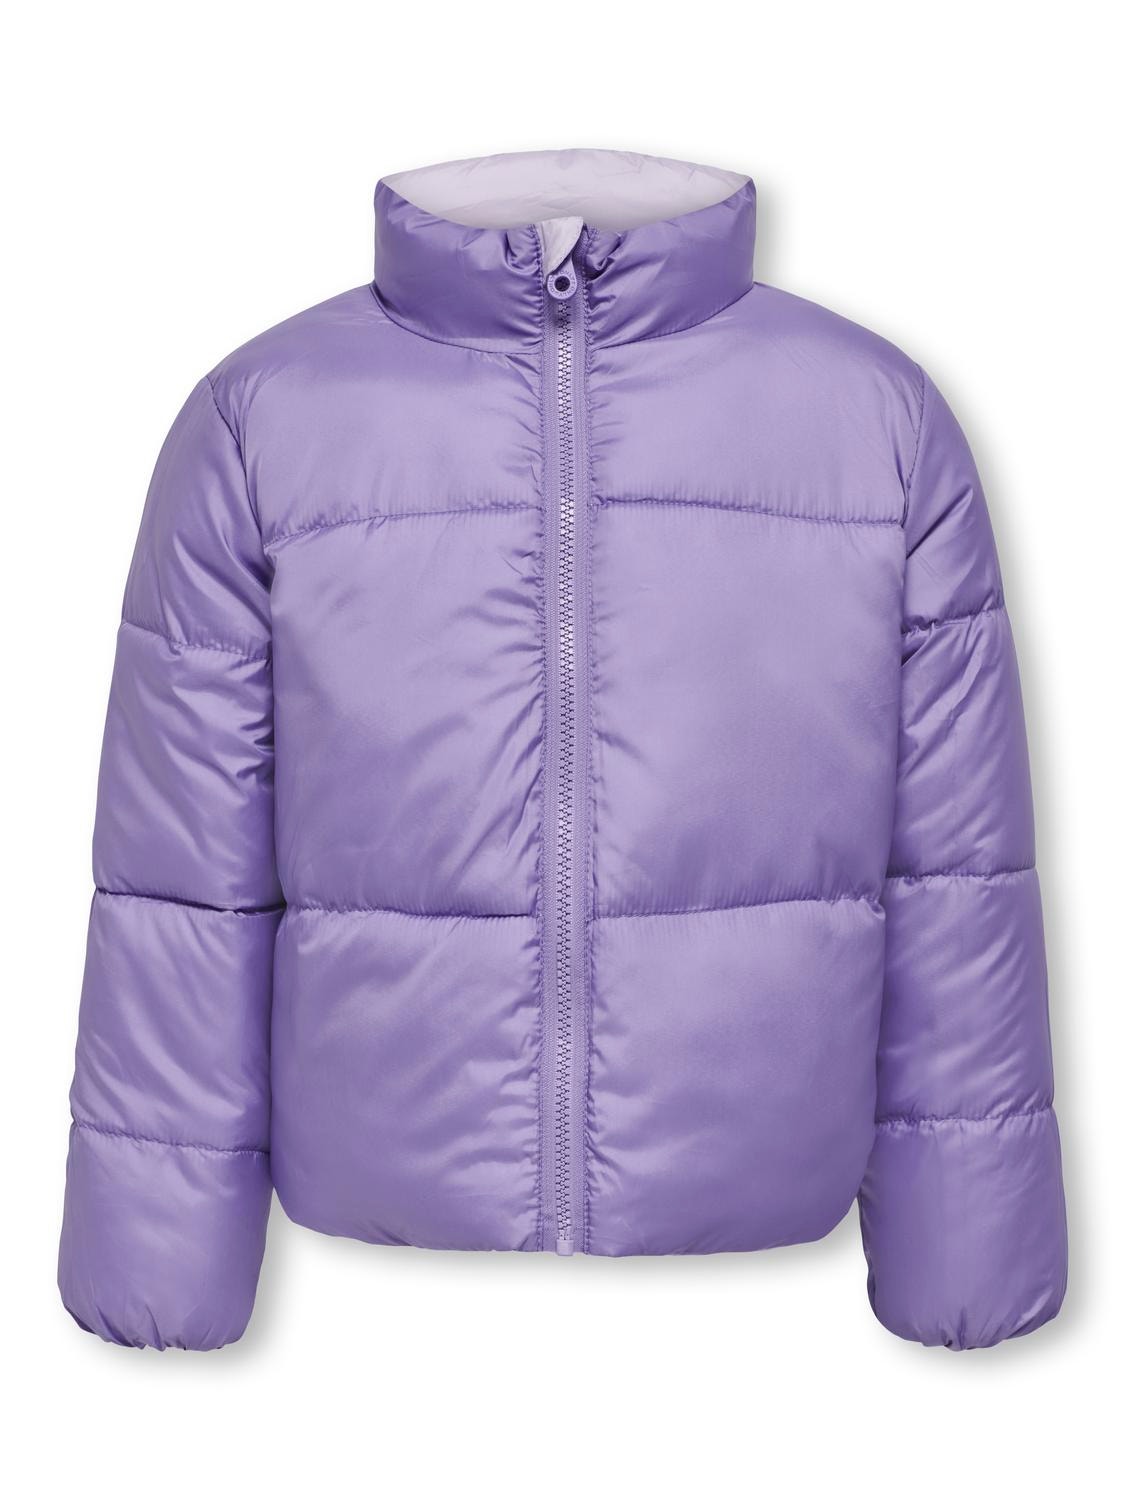 ONLY Jacket with high neck -Pastel Lilac - 15296063